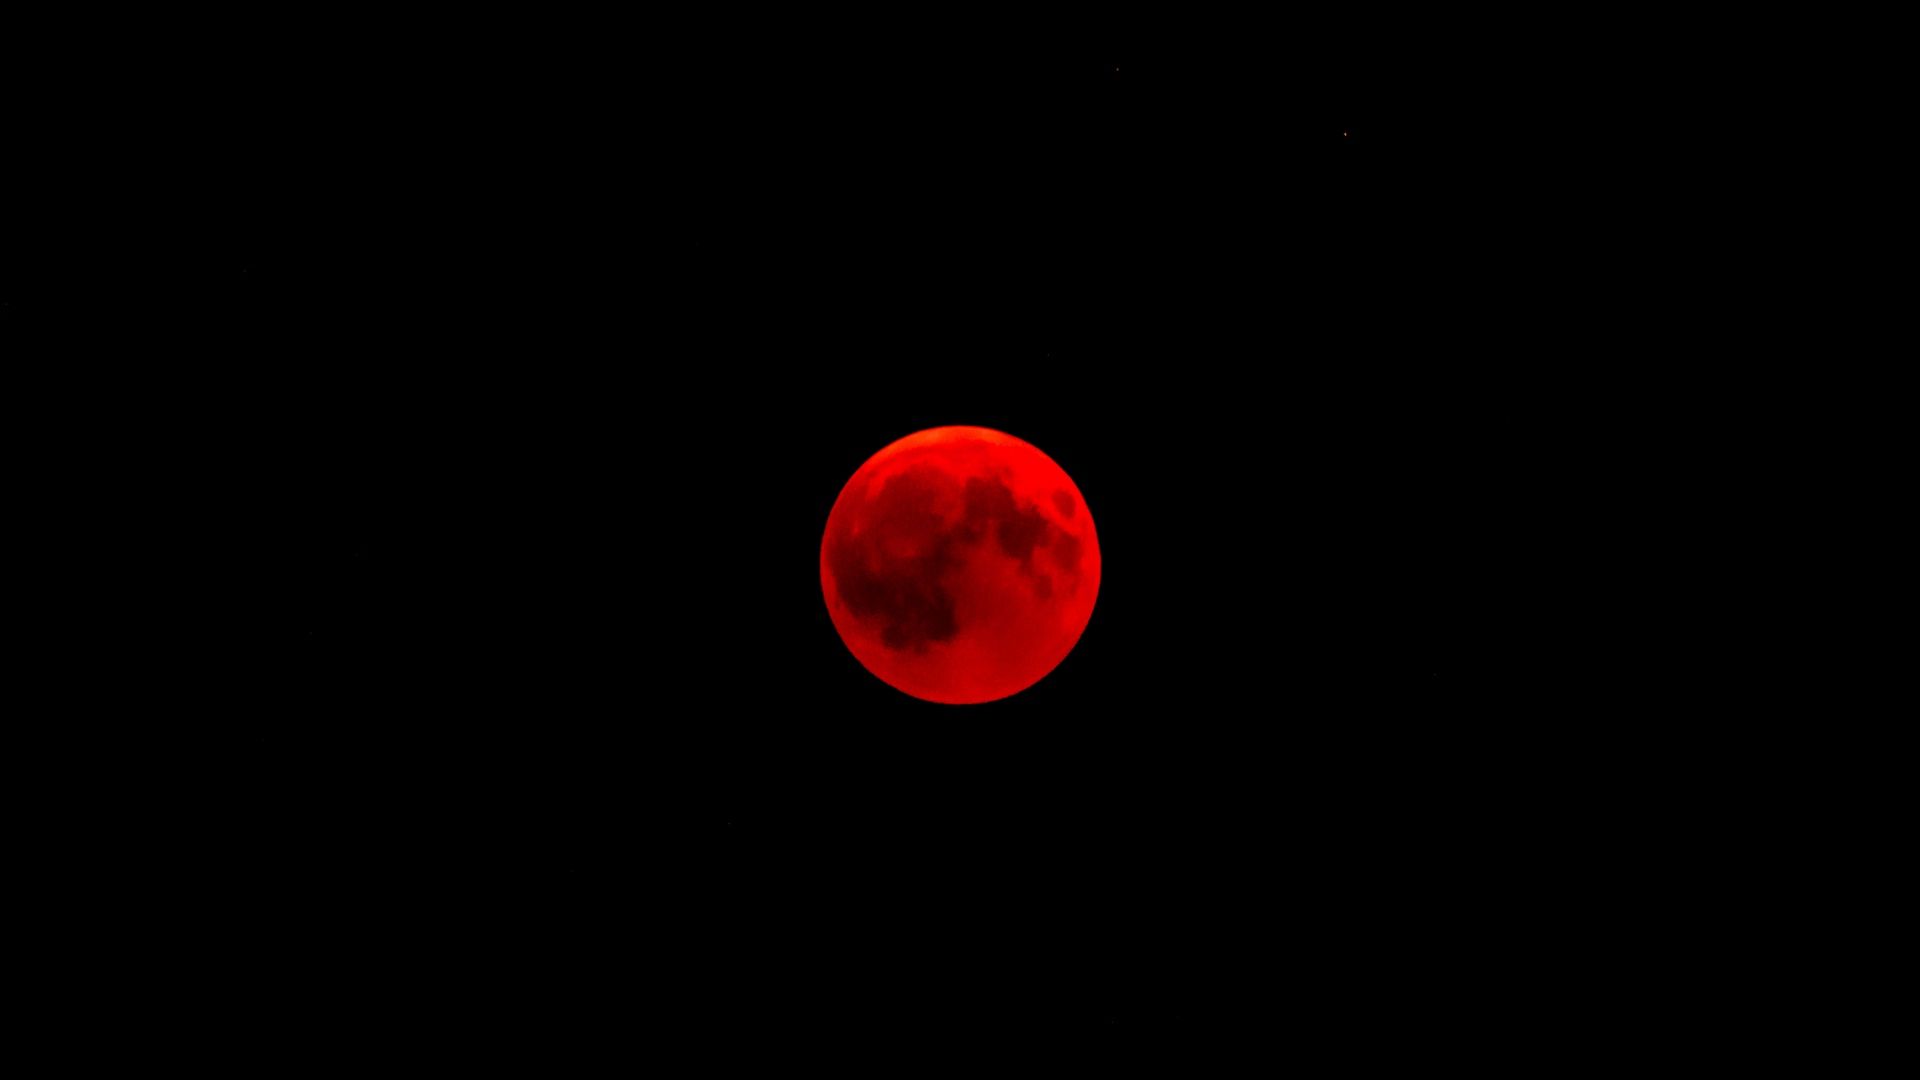 Wallpaper red moon moon full moon eclipse. Red moon, Dark red wallpaper, Red and black wallpaper